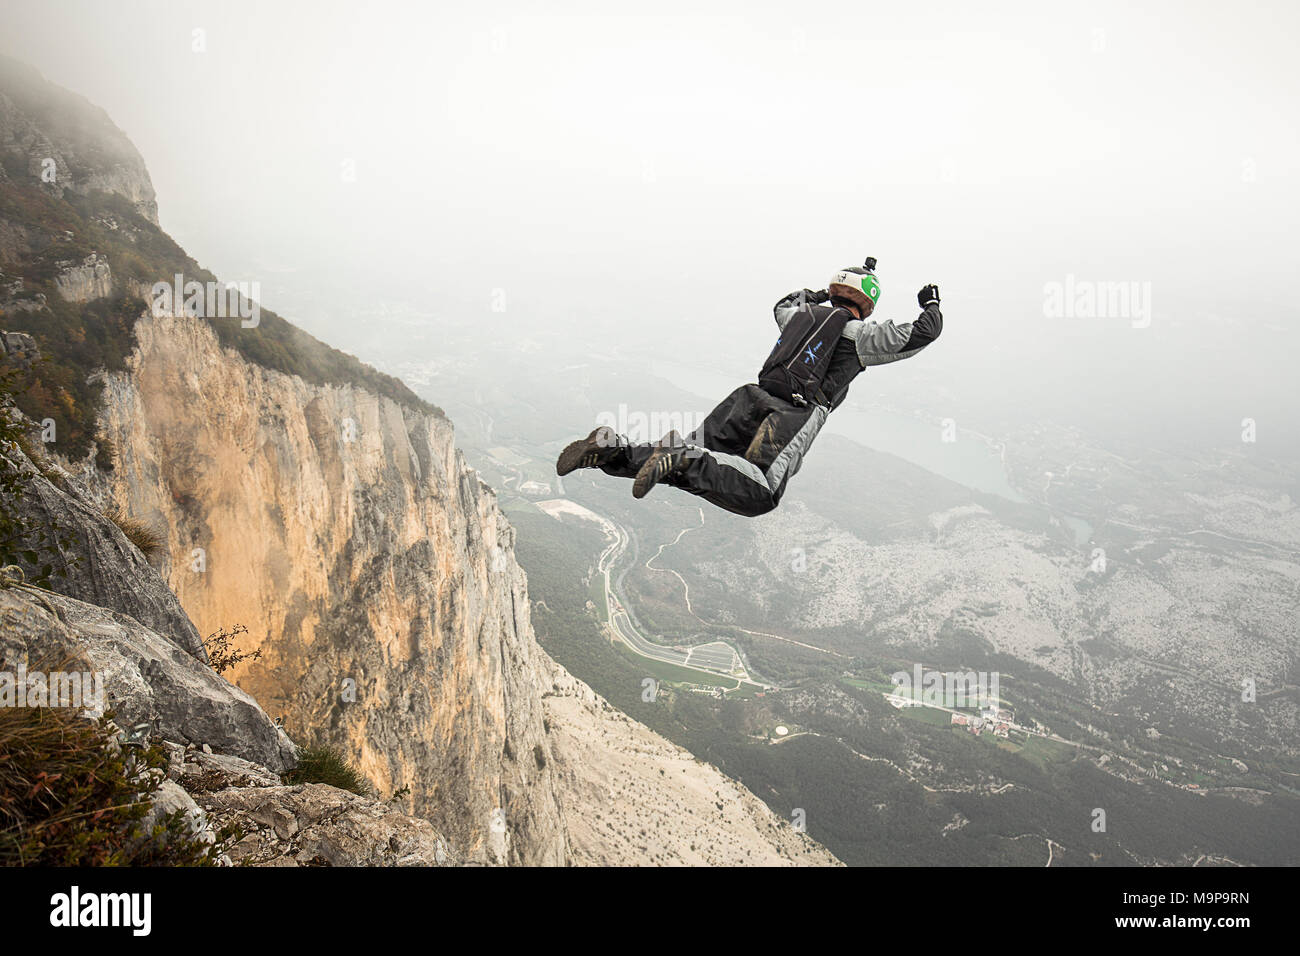 Base jumper mid air right after cliff jump during foggy weather, Brento, Venetien, Italy Stock Photo